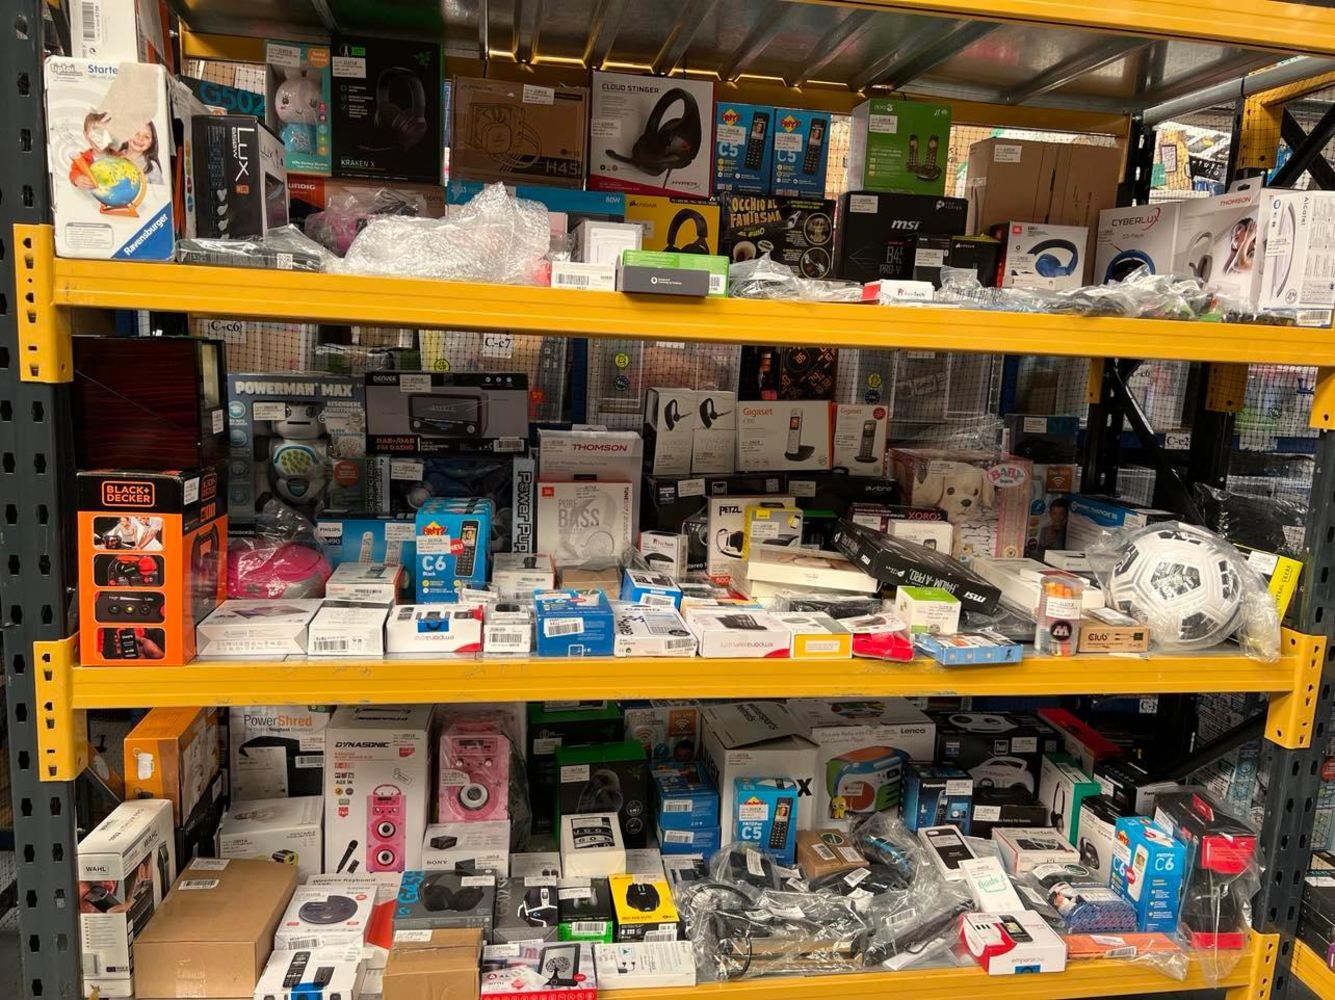 No Reserve !Sale Up to 90%! Amazon Raw Returns !Zebra, Apple, VTech, Bosch, Sony, Philips, Rotary ! Camcorders, Phones, Watches, Pumps, Toners !